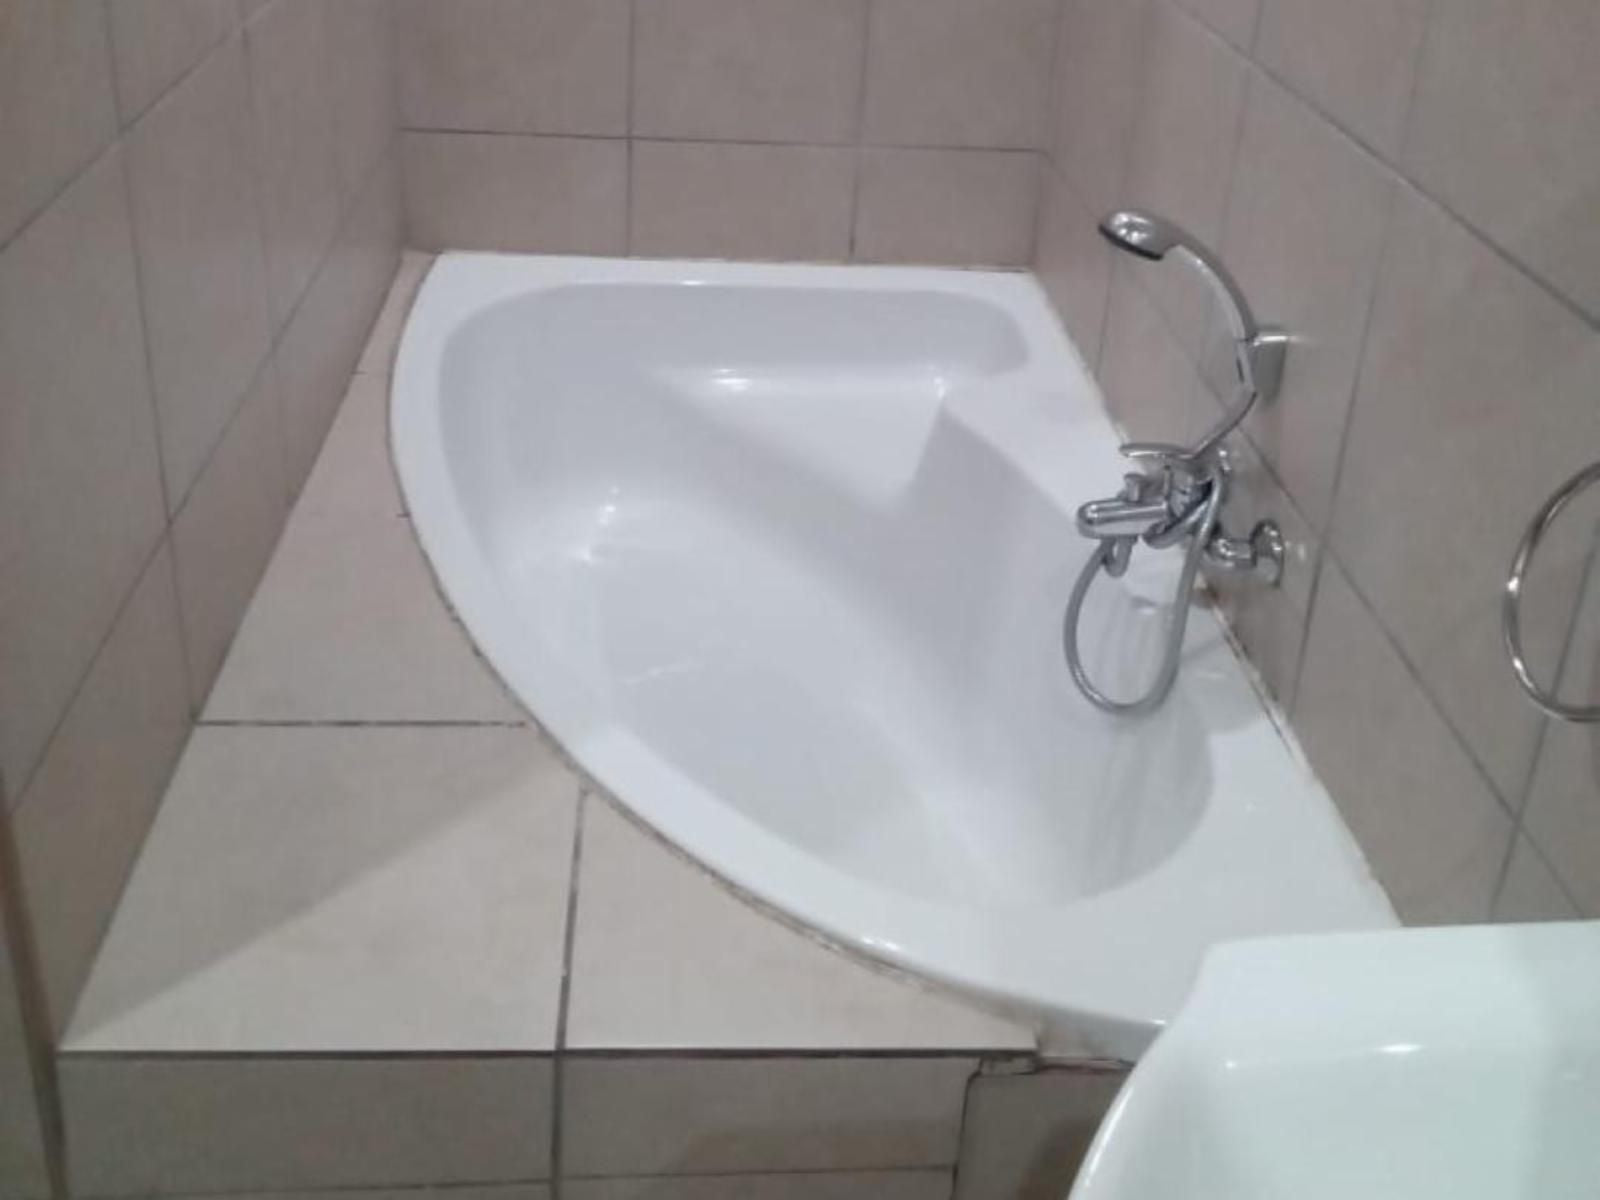 Grand Central Guesthouse Rustenburg Central Rustenburg North West Province South Africa Colorless, Bathroom